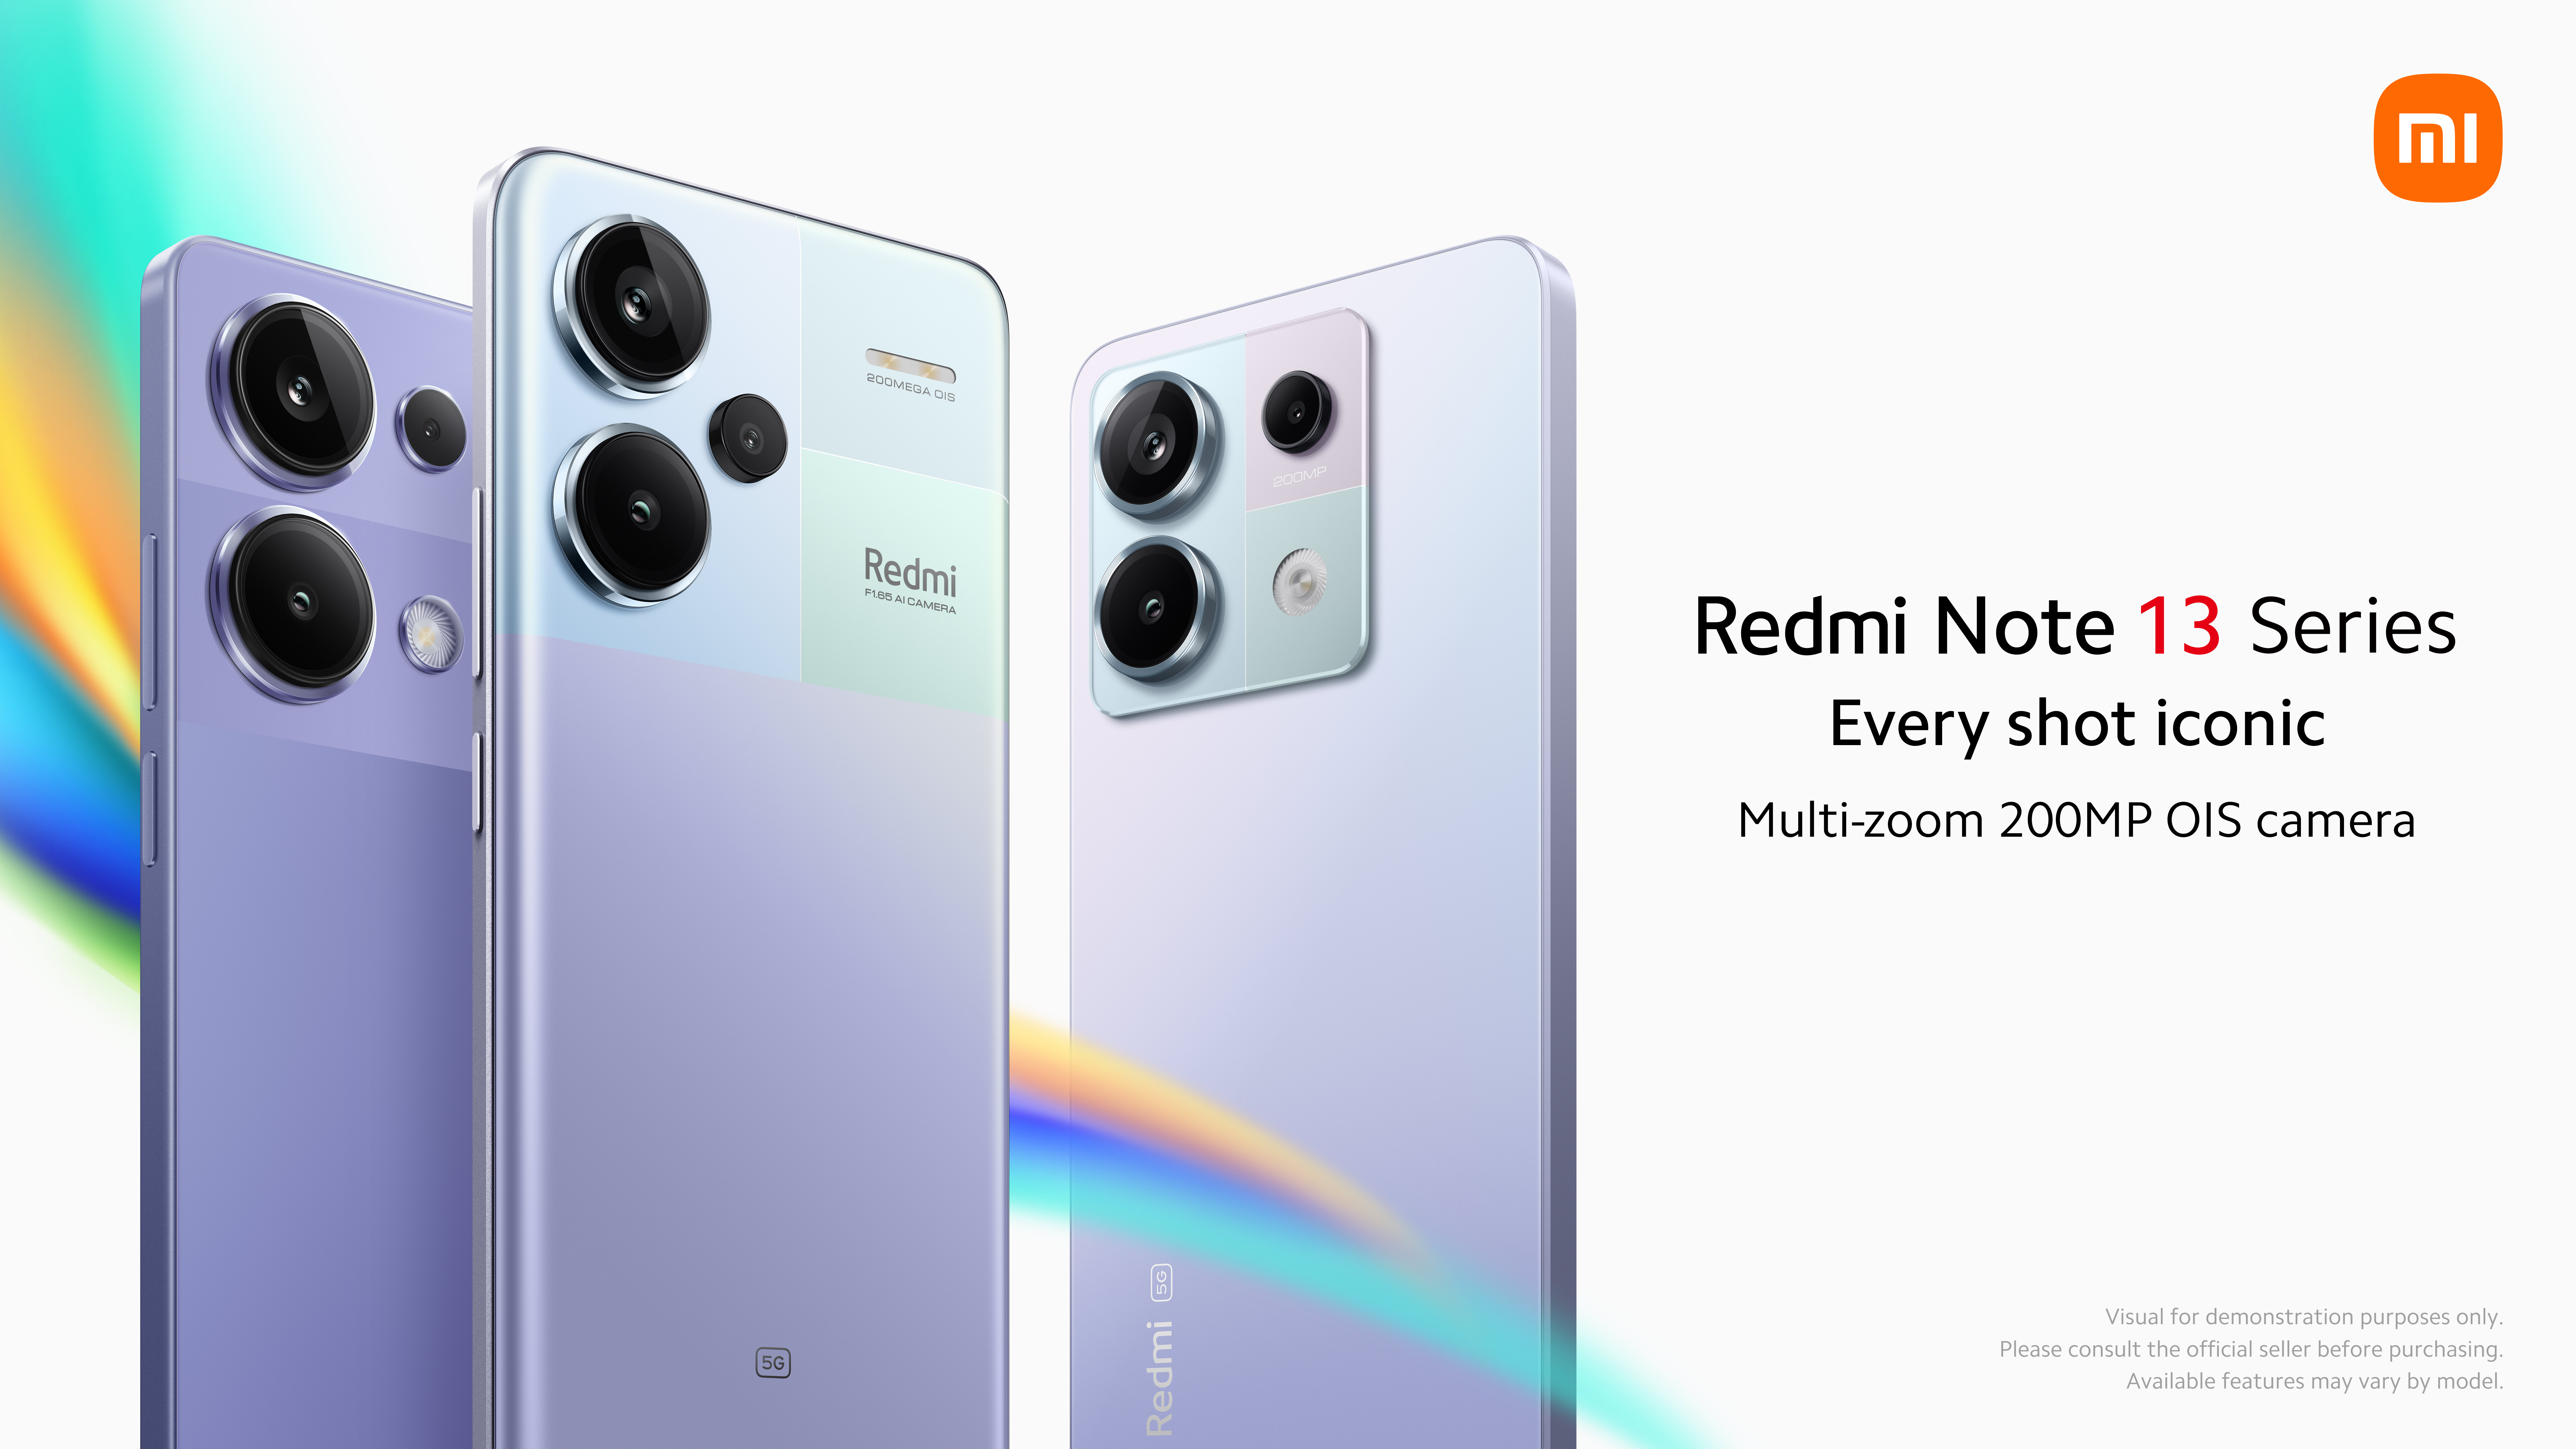 Five phones from Redmi Note 13 series leak ahead of global launch